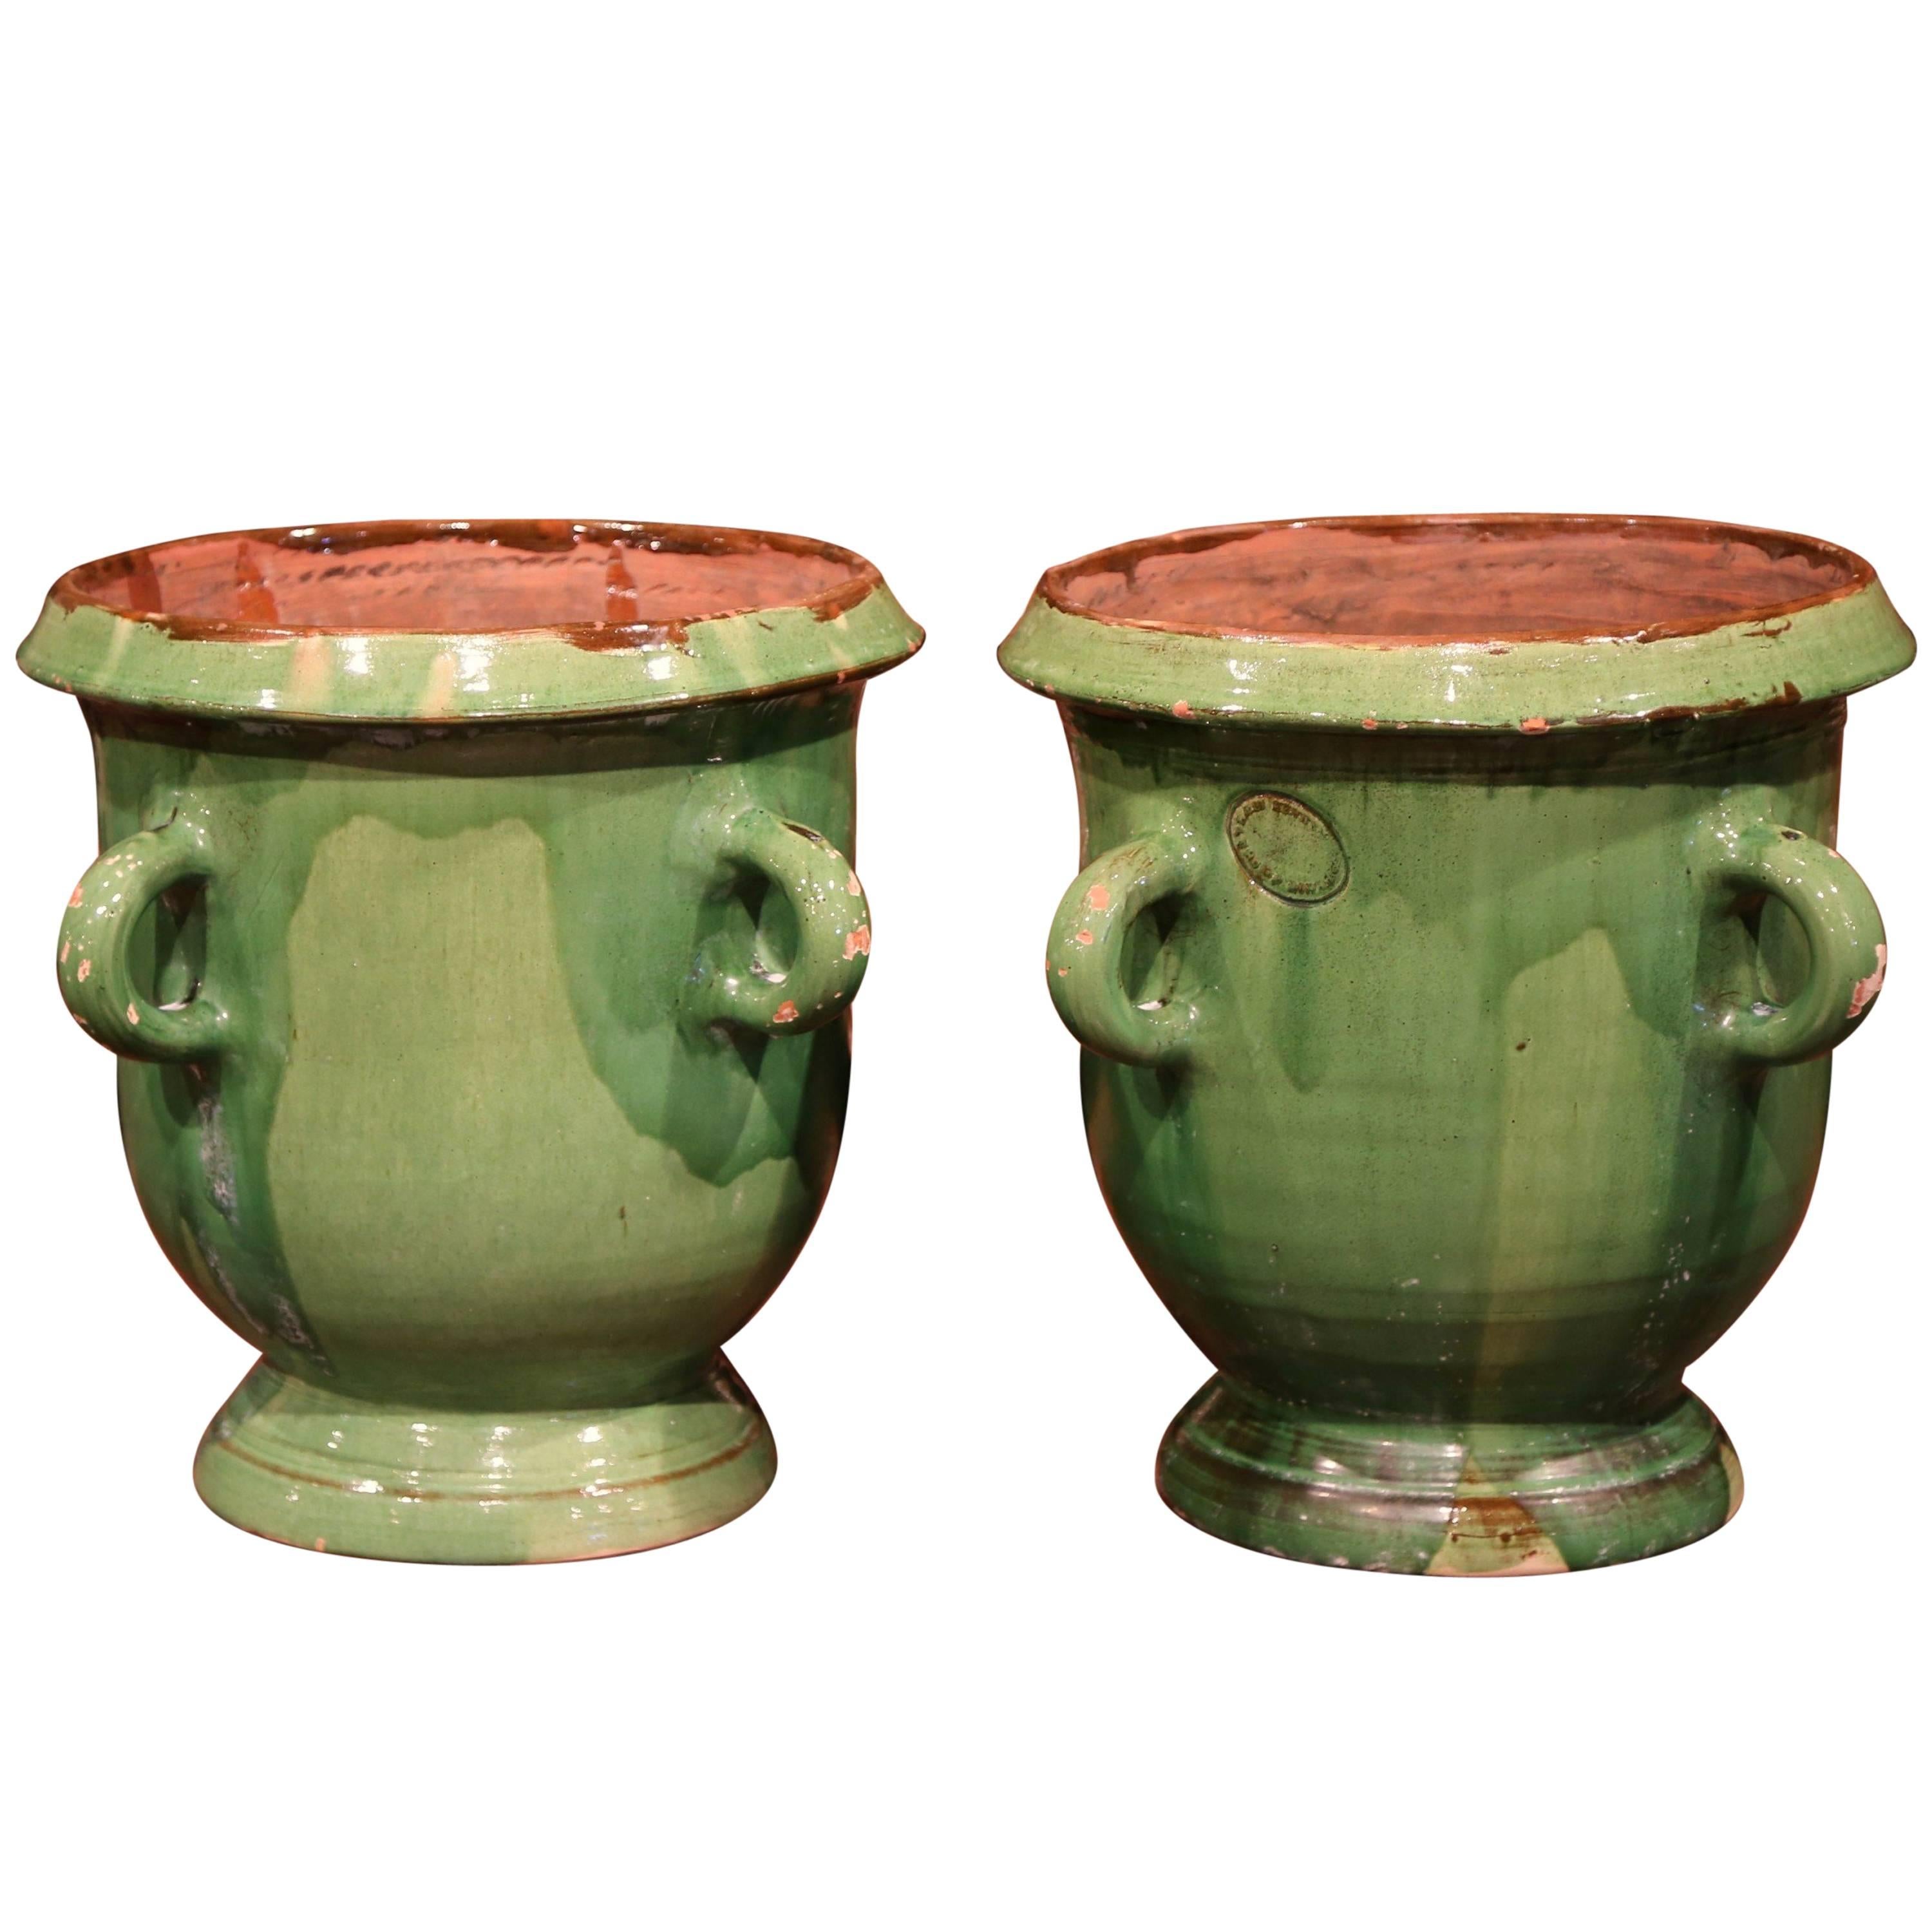 Pair of Mid-20th Century French Glazed Green Planters with Handles from Provence